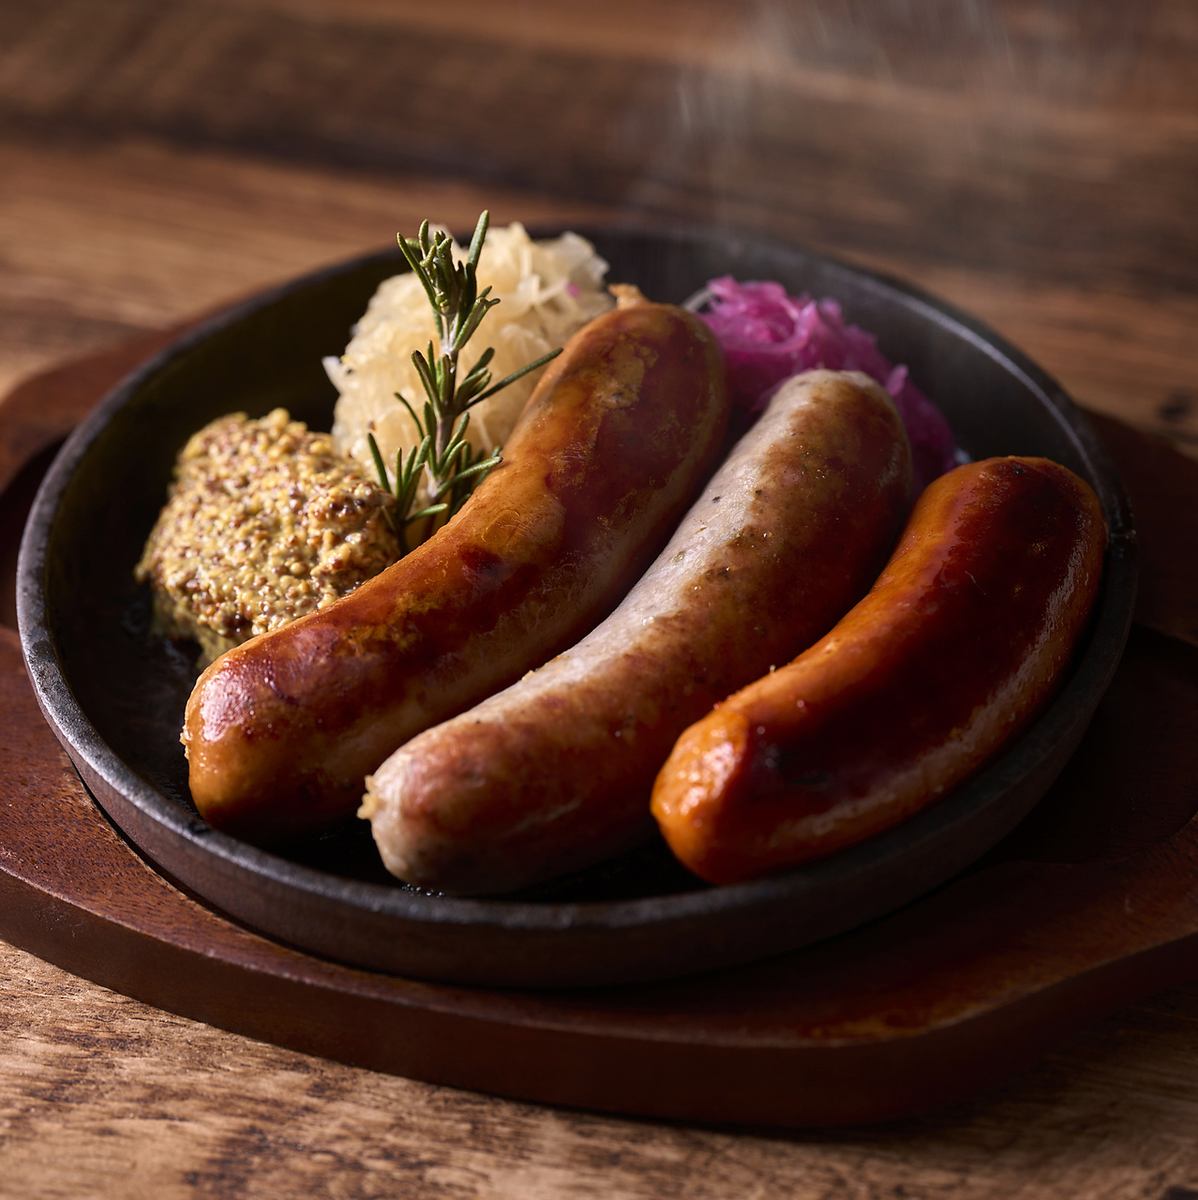 This is a restaurant where you can enjoy authentic German cuisine that goes well with craft beer.